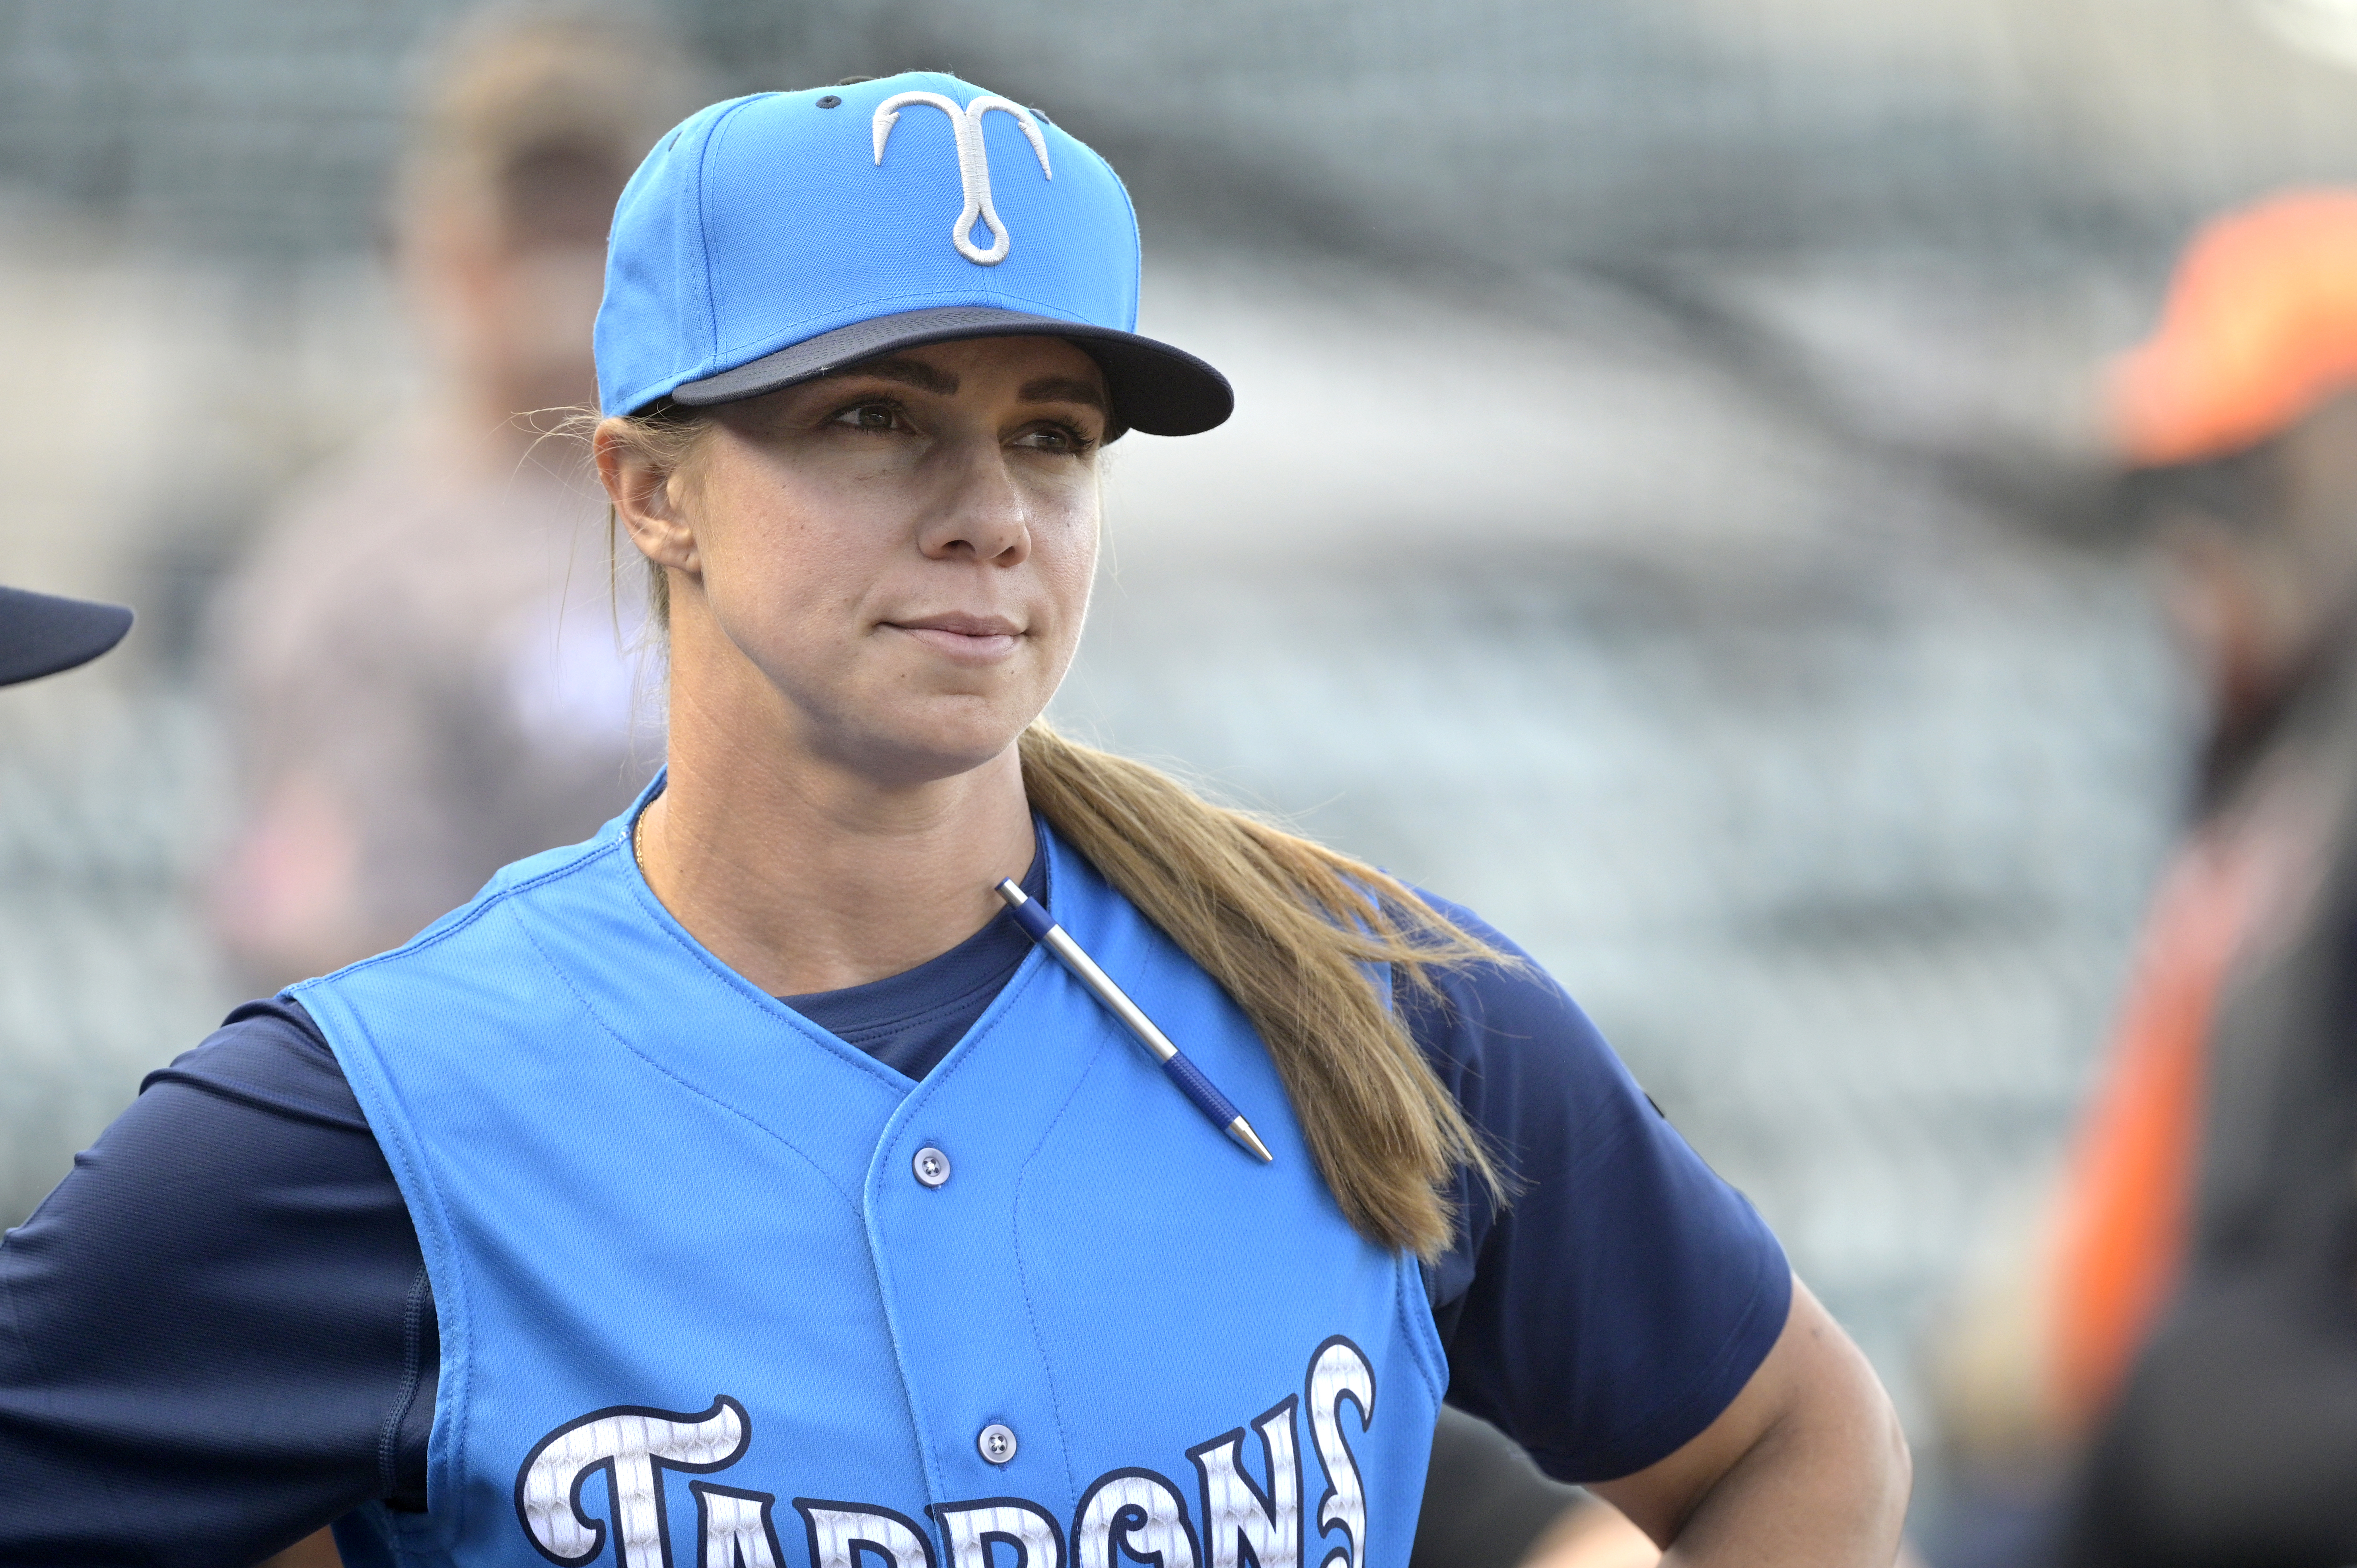 2019 Year-In-Review: Tampa Tarpons - Pinstriped Prospects